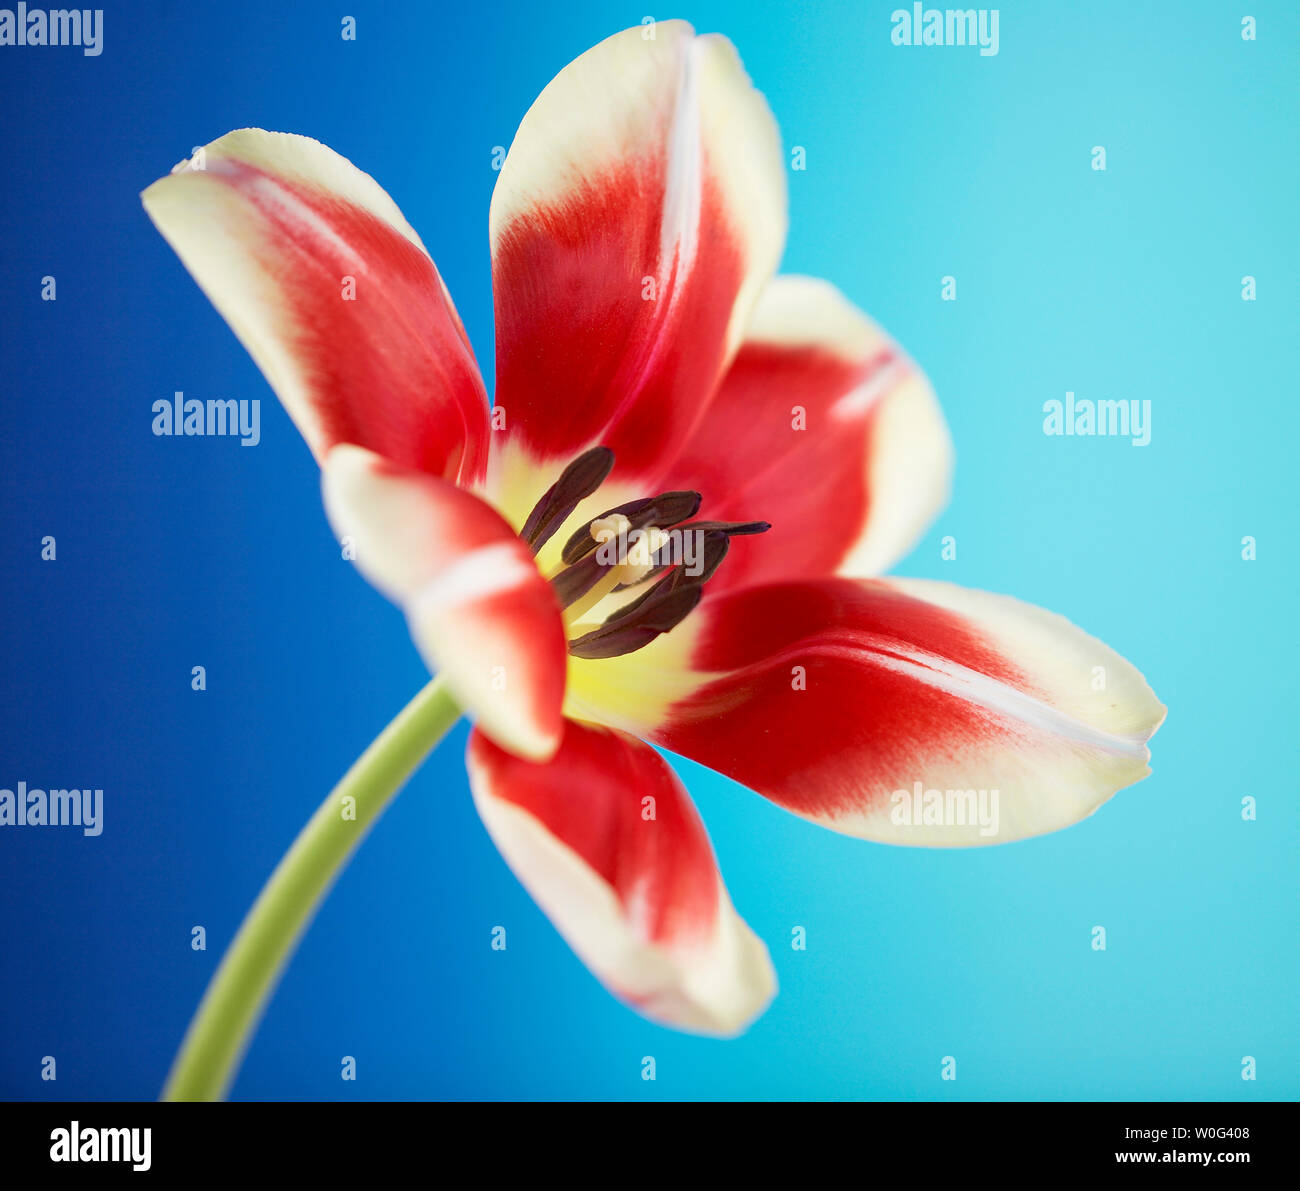 Red striped tulip flowers on a coloured background Stock Photo